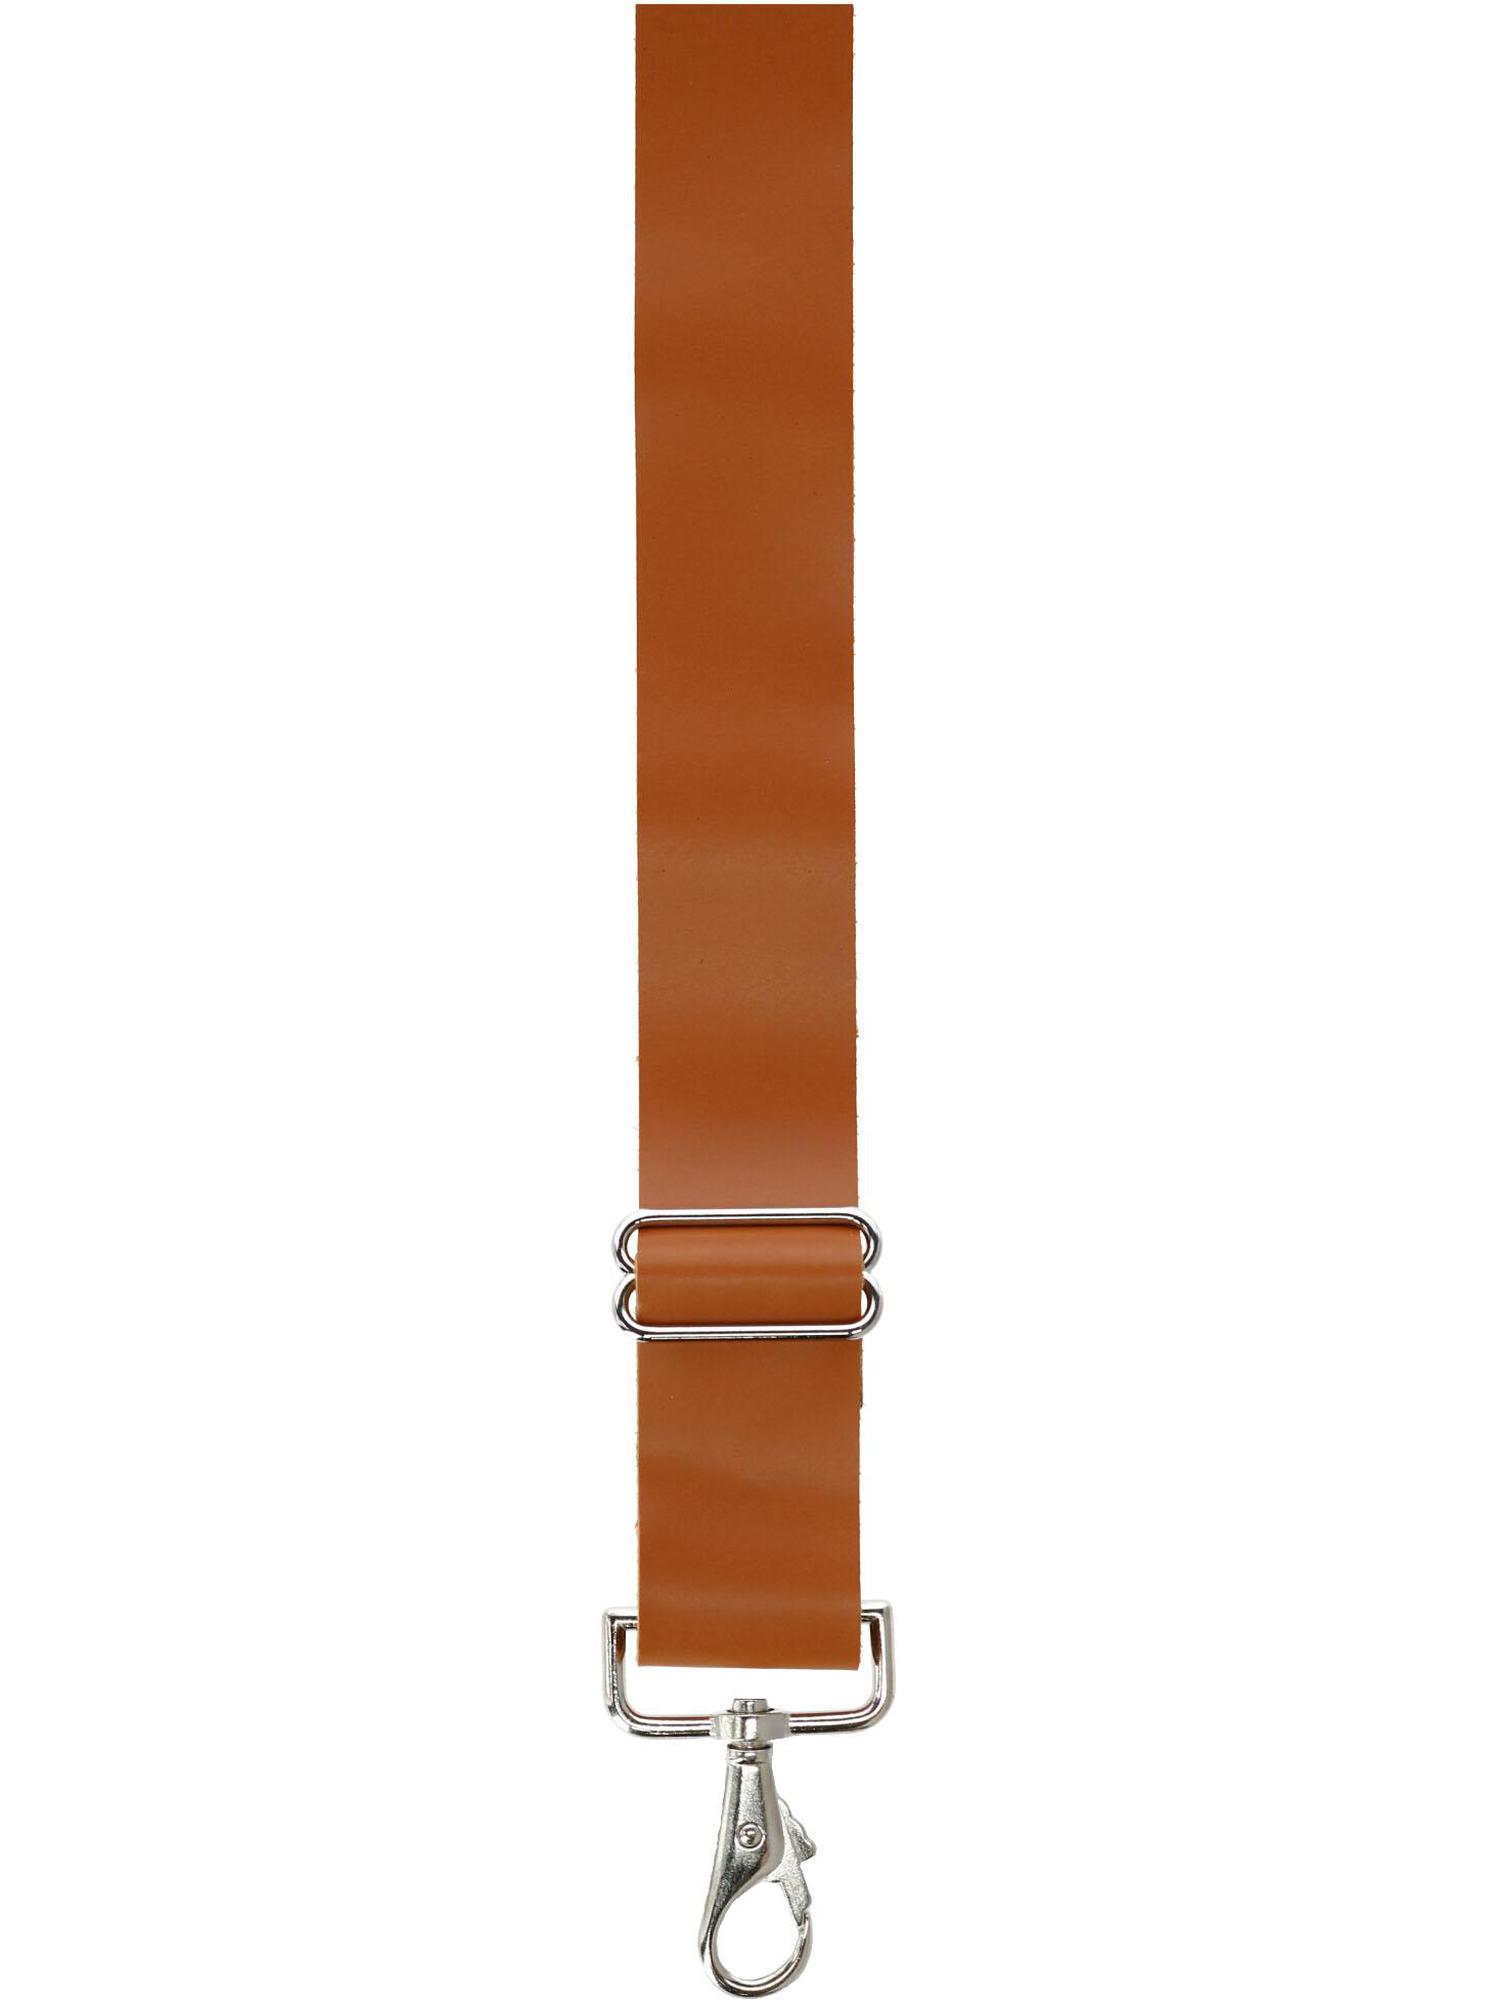 CTM  Smooth Coated Leather Wide Width Suspenders with Metal Swivel Hook Ends - image 4 of 4